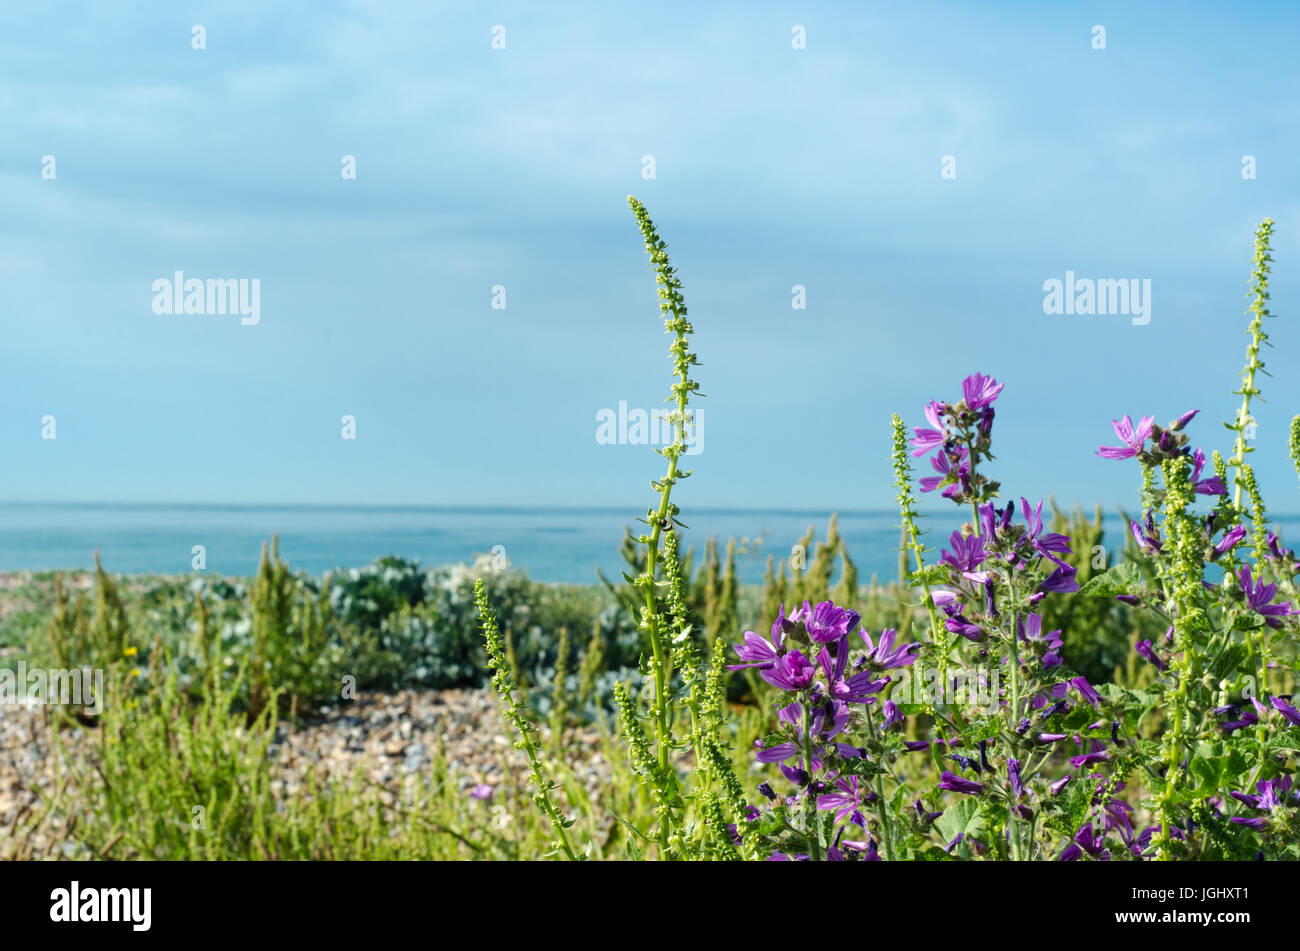 Coastal flora on a pebble beach in southern England, including purple mallow.  Bright day with sea, horizon and sky in background. Stock Photo